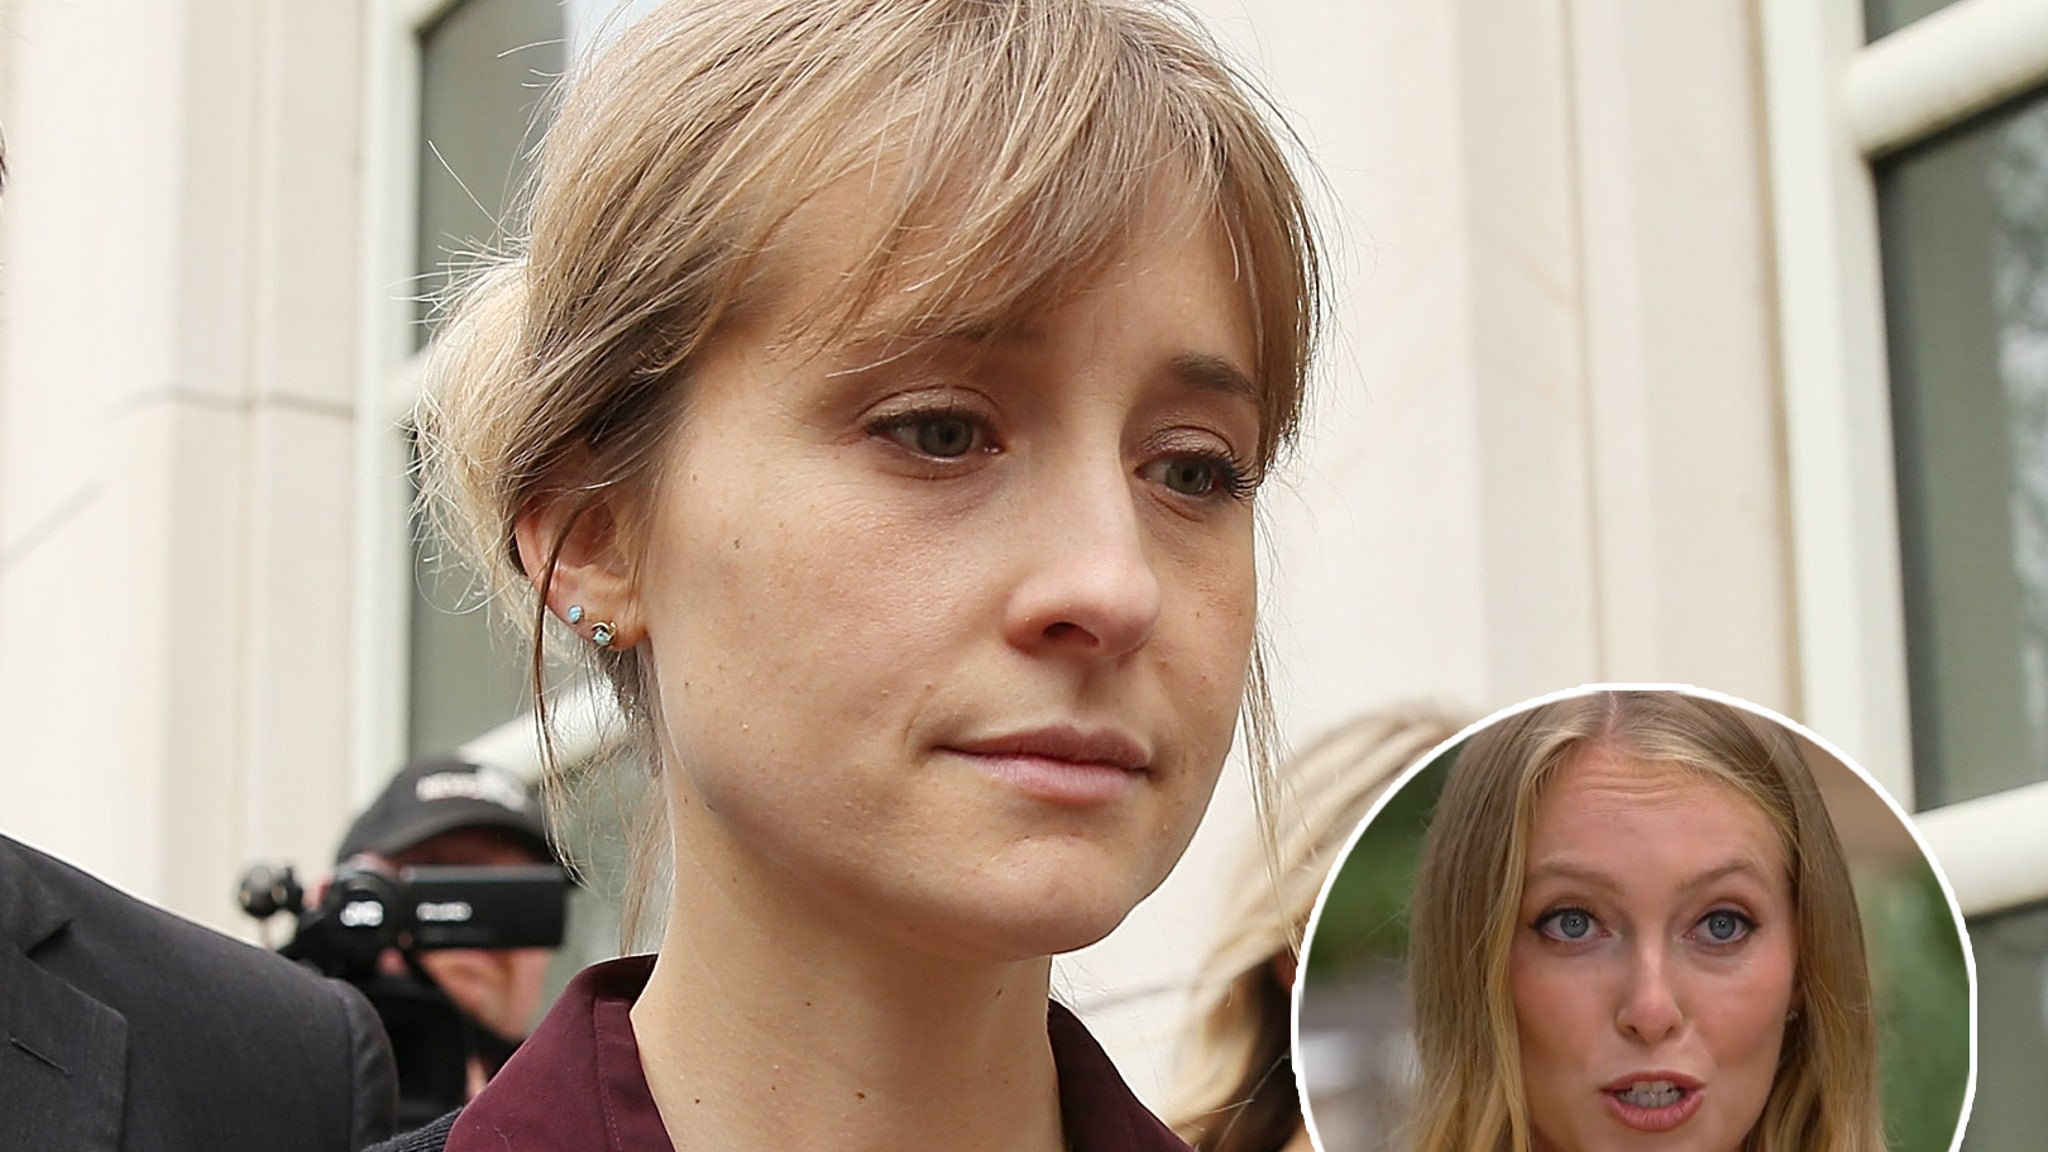 NXIVM Survivor India Oxenberg Alleges 'Master' Allison Mack Blackmailed Her  With Nude Photos